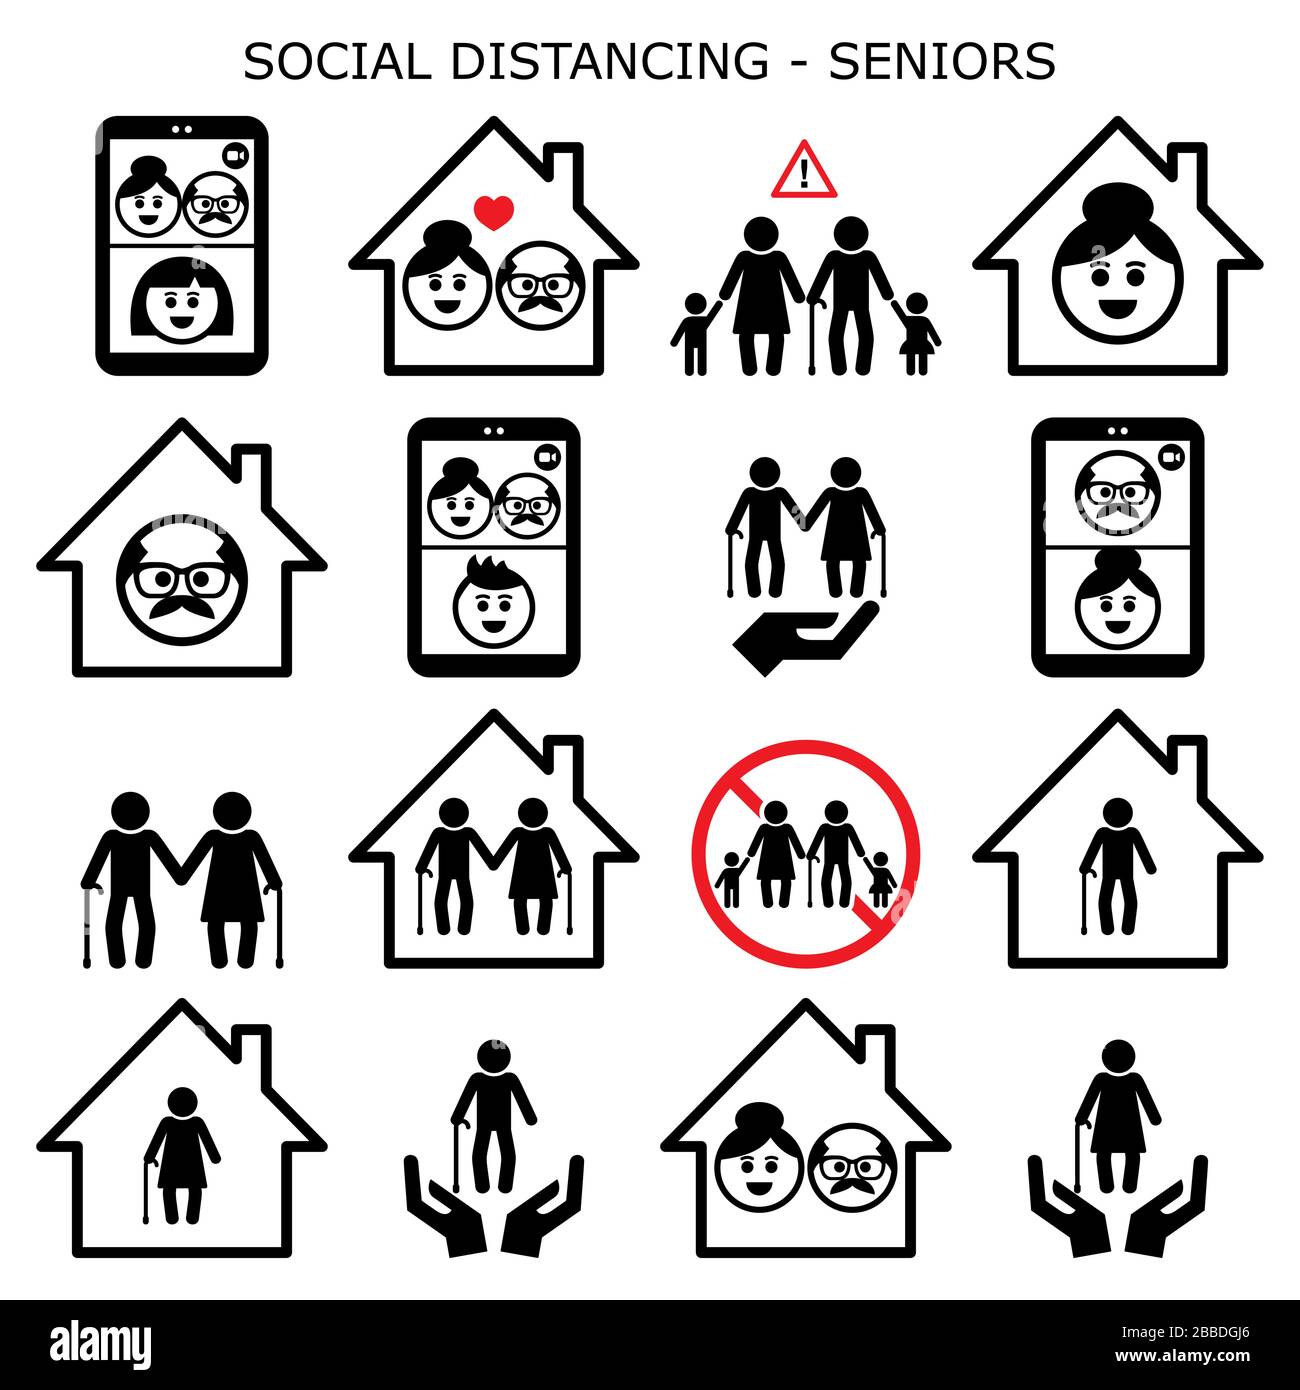 Senior man and woman social distancing at home vector icons set, grandparents leaving alone using video calls to connect with their grandchildren and Stock Vector